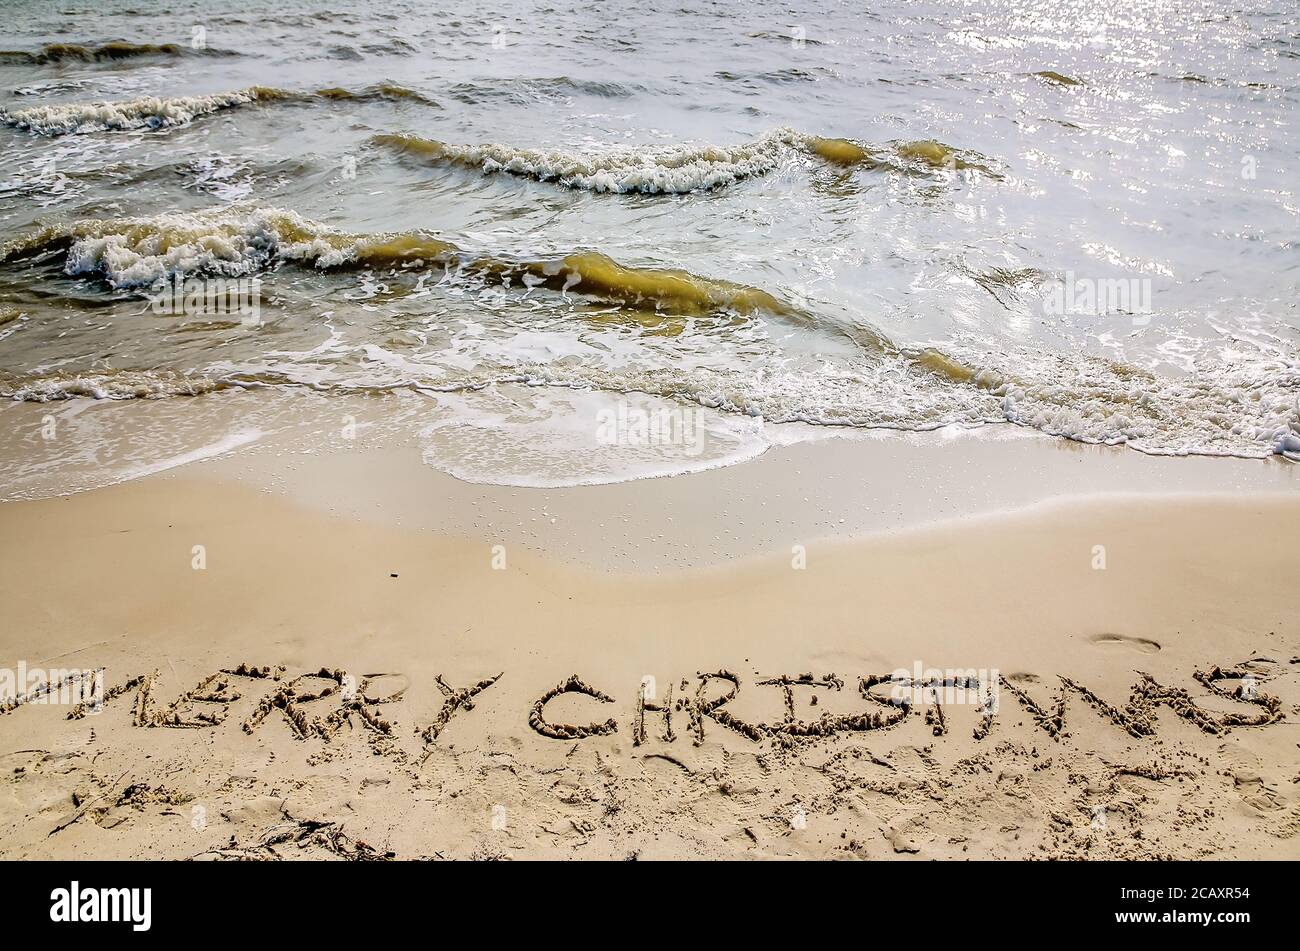 “Merry Christmas” is written in the sand on the beach as waves crash, Dec. 24, 2012, in Dauphin Island, Alabama. Stock Photo